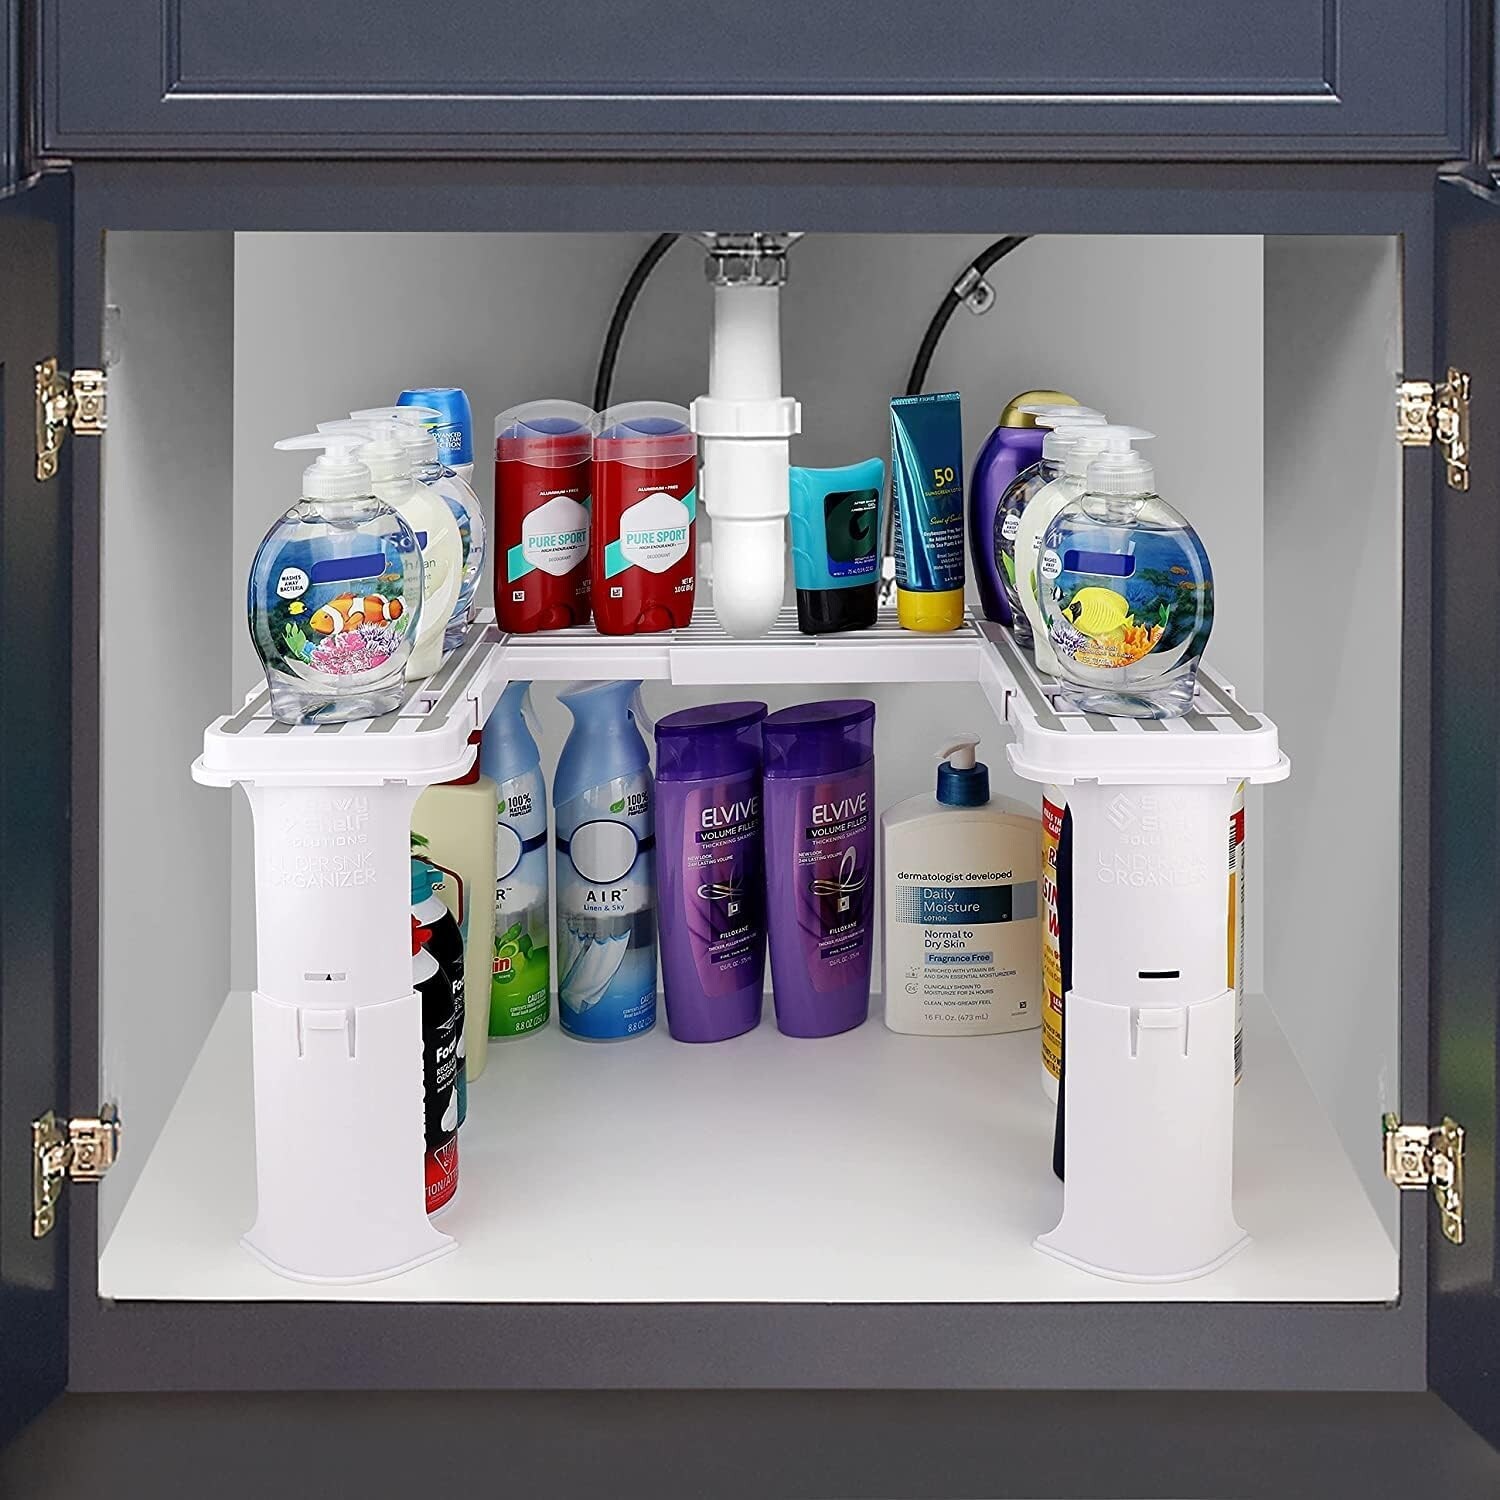 https://ak1.ostkcdn.com/images/products/is/images/direct/e189f96baac126b923b610e9664cc31a323f2c6d/Savvy-Shelf-Expandable-Under-Sink-Organizer-and-Storage.jpg